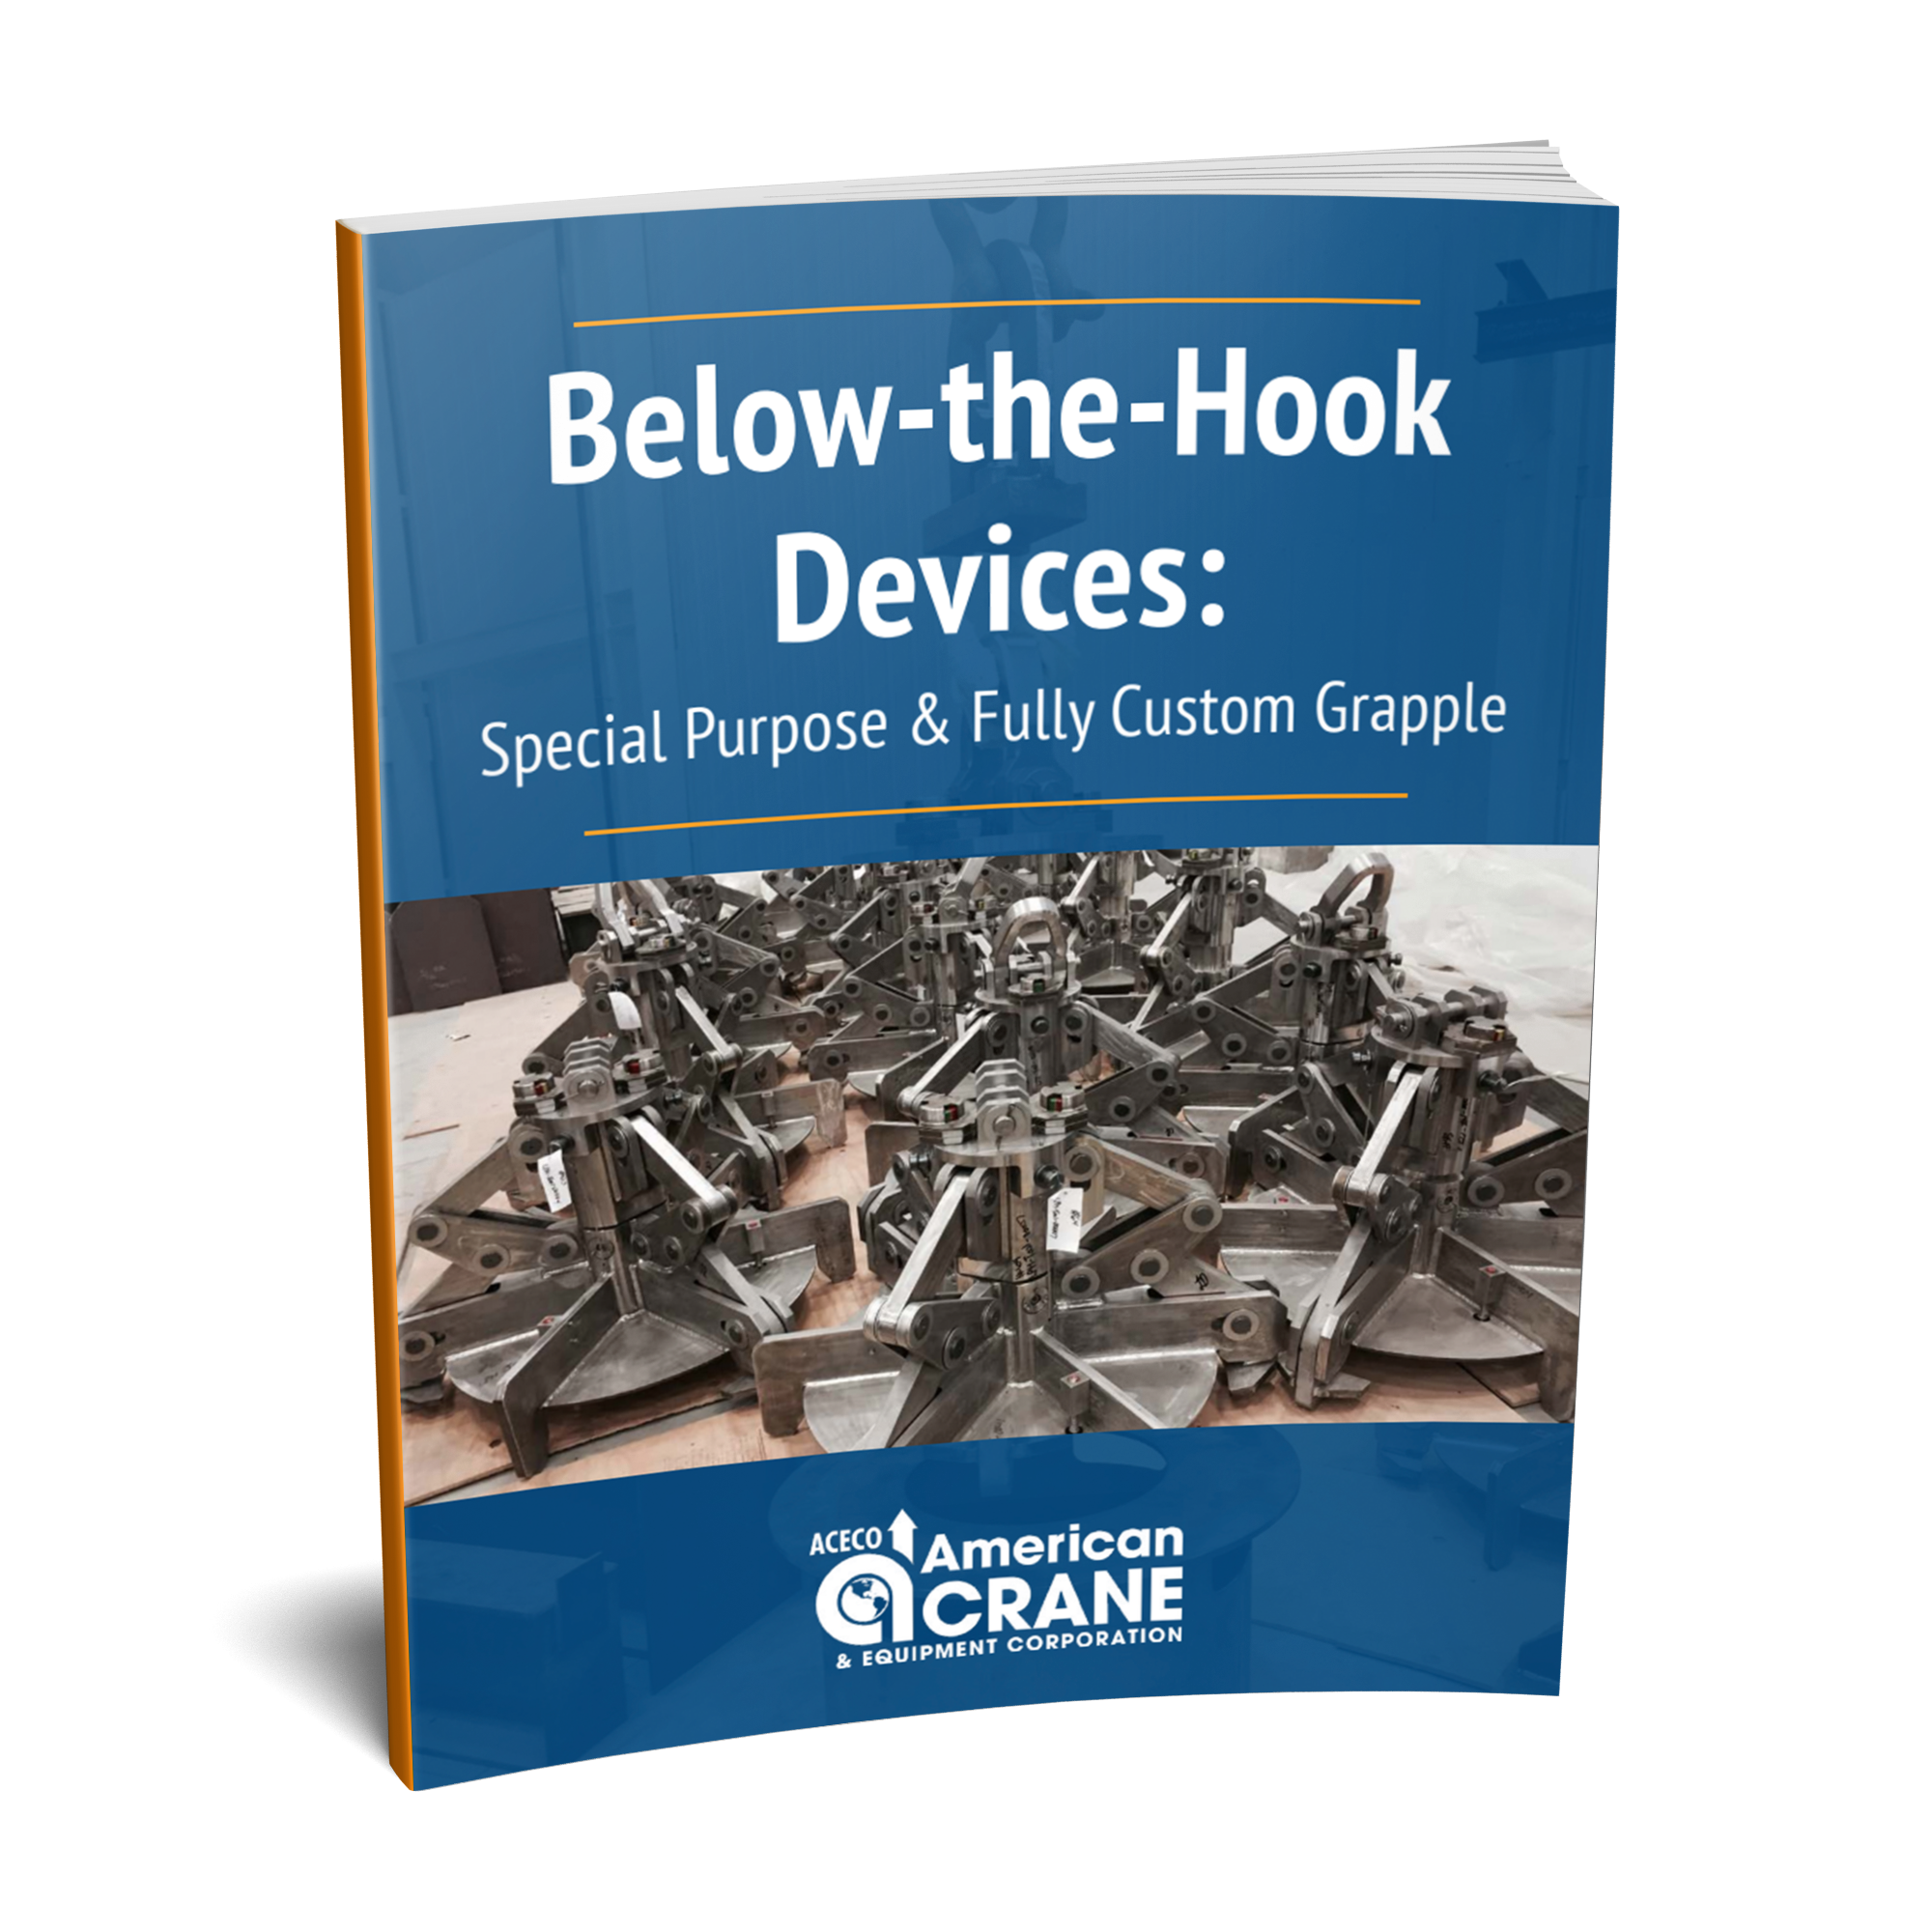 Below-the-Hook Devices: Special Purpose & Fully Custom Grapple